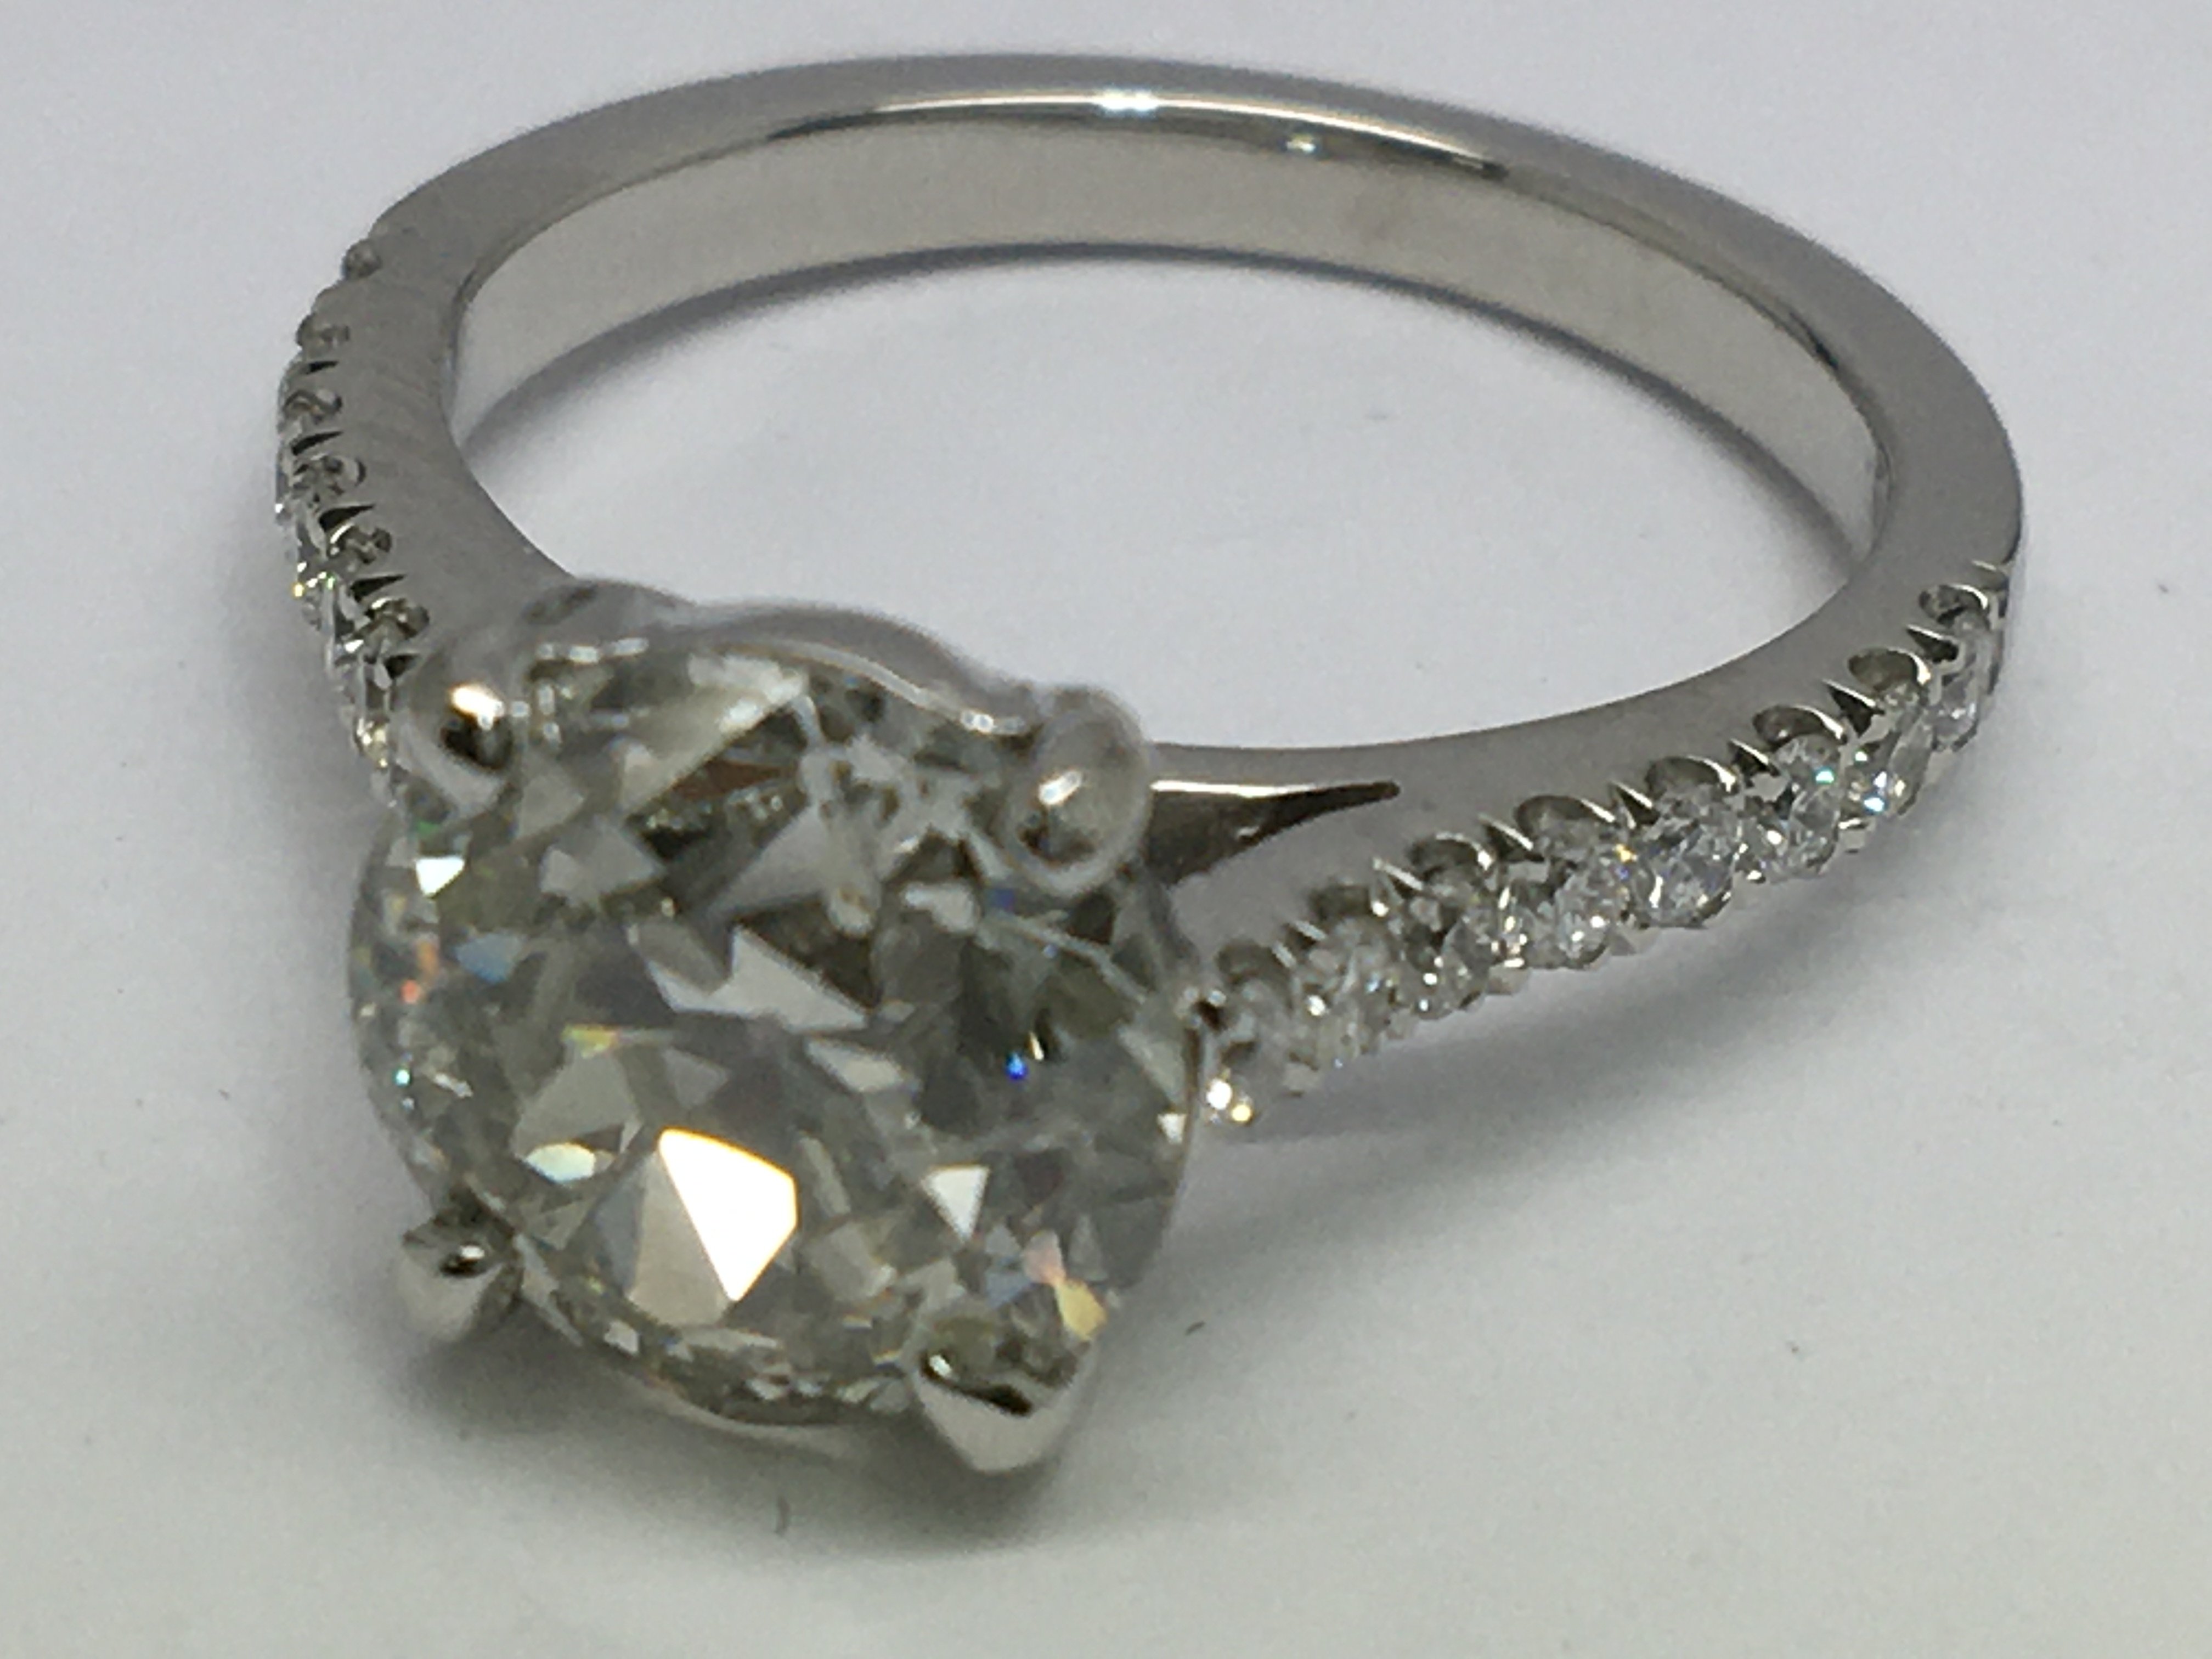 A certified platinum solitaire diamond ring with d